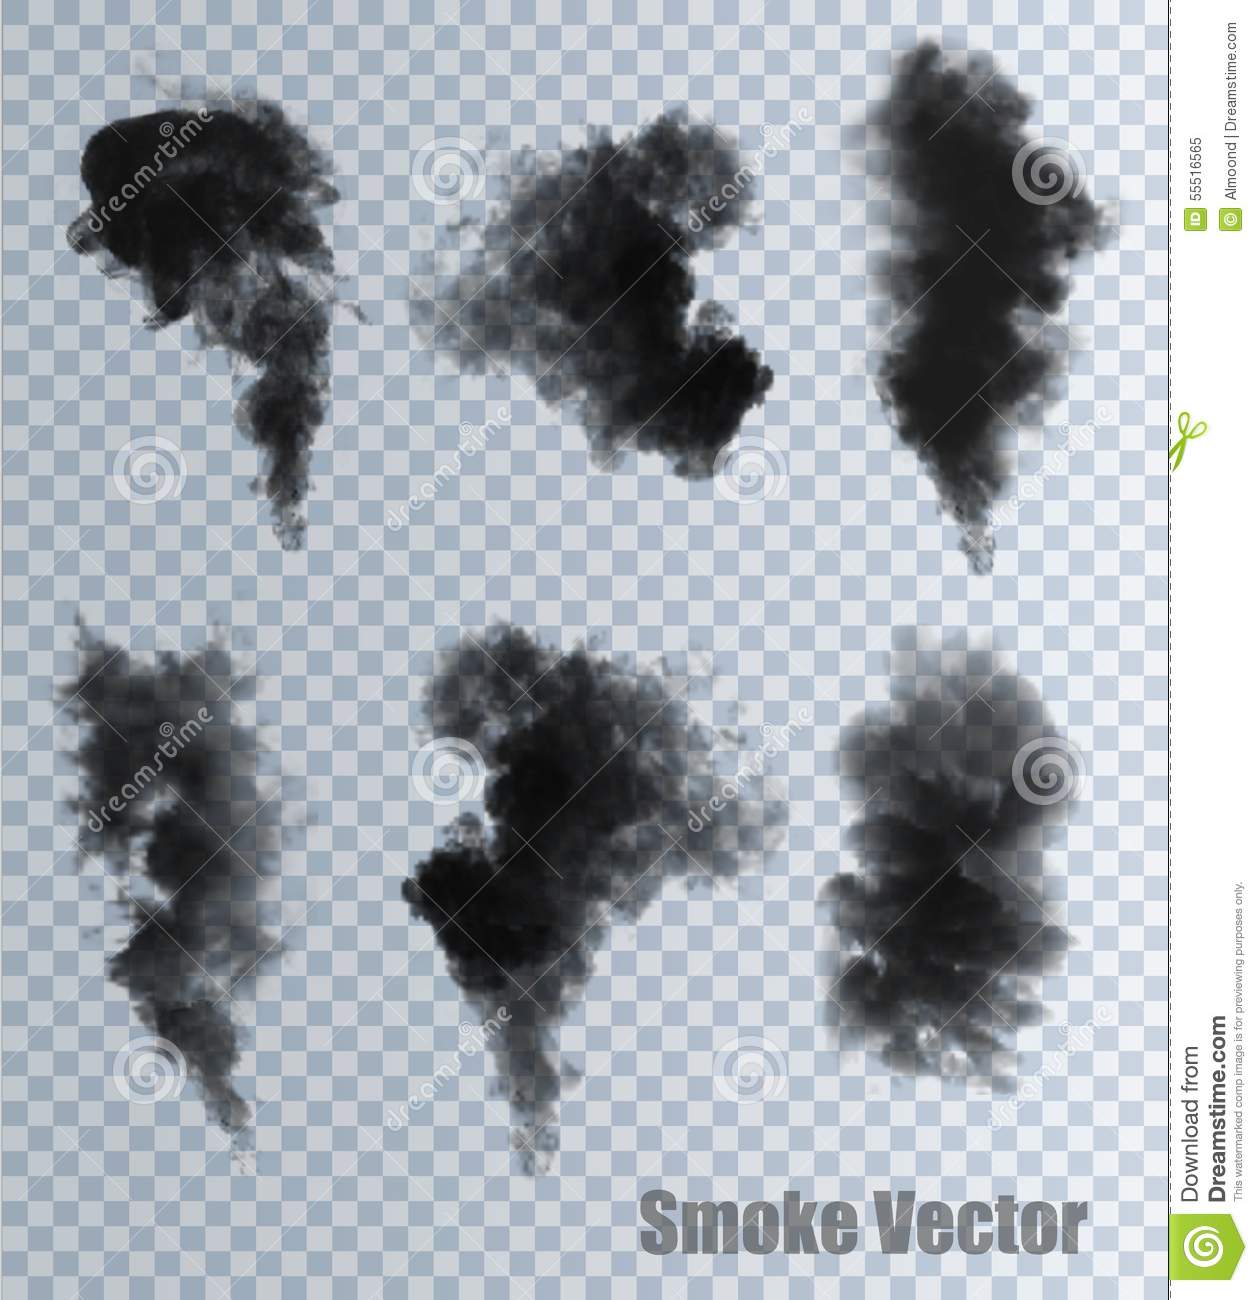 Smoke plume clipart - Clipground